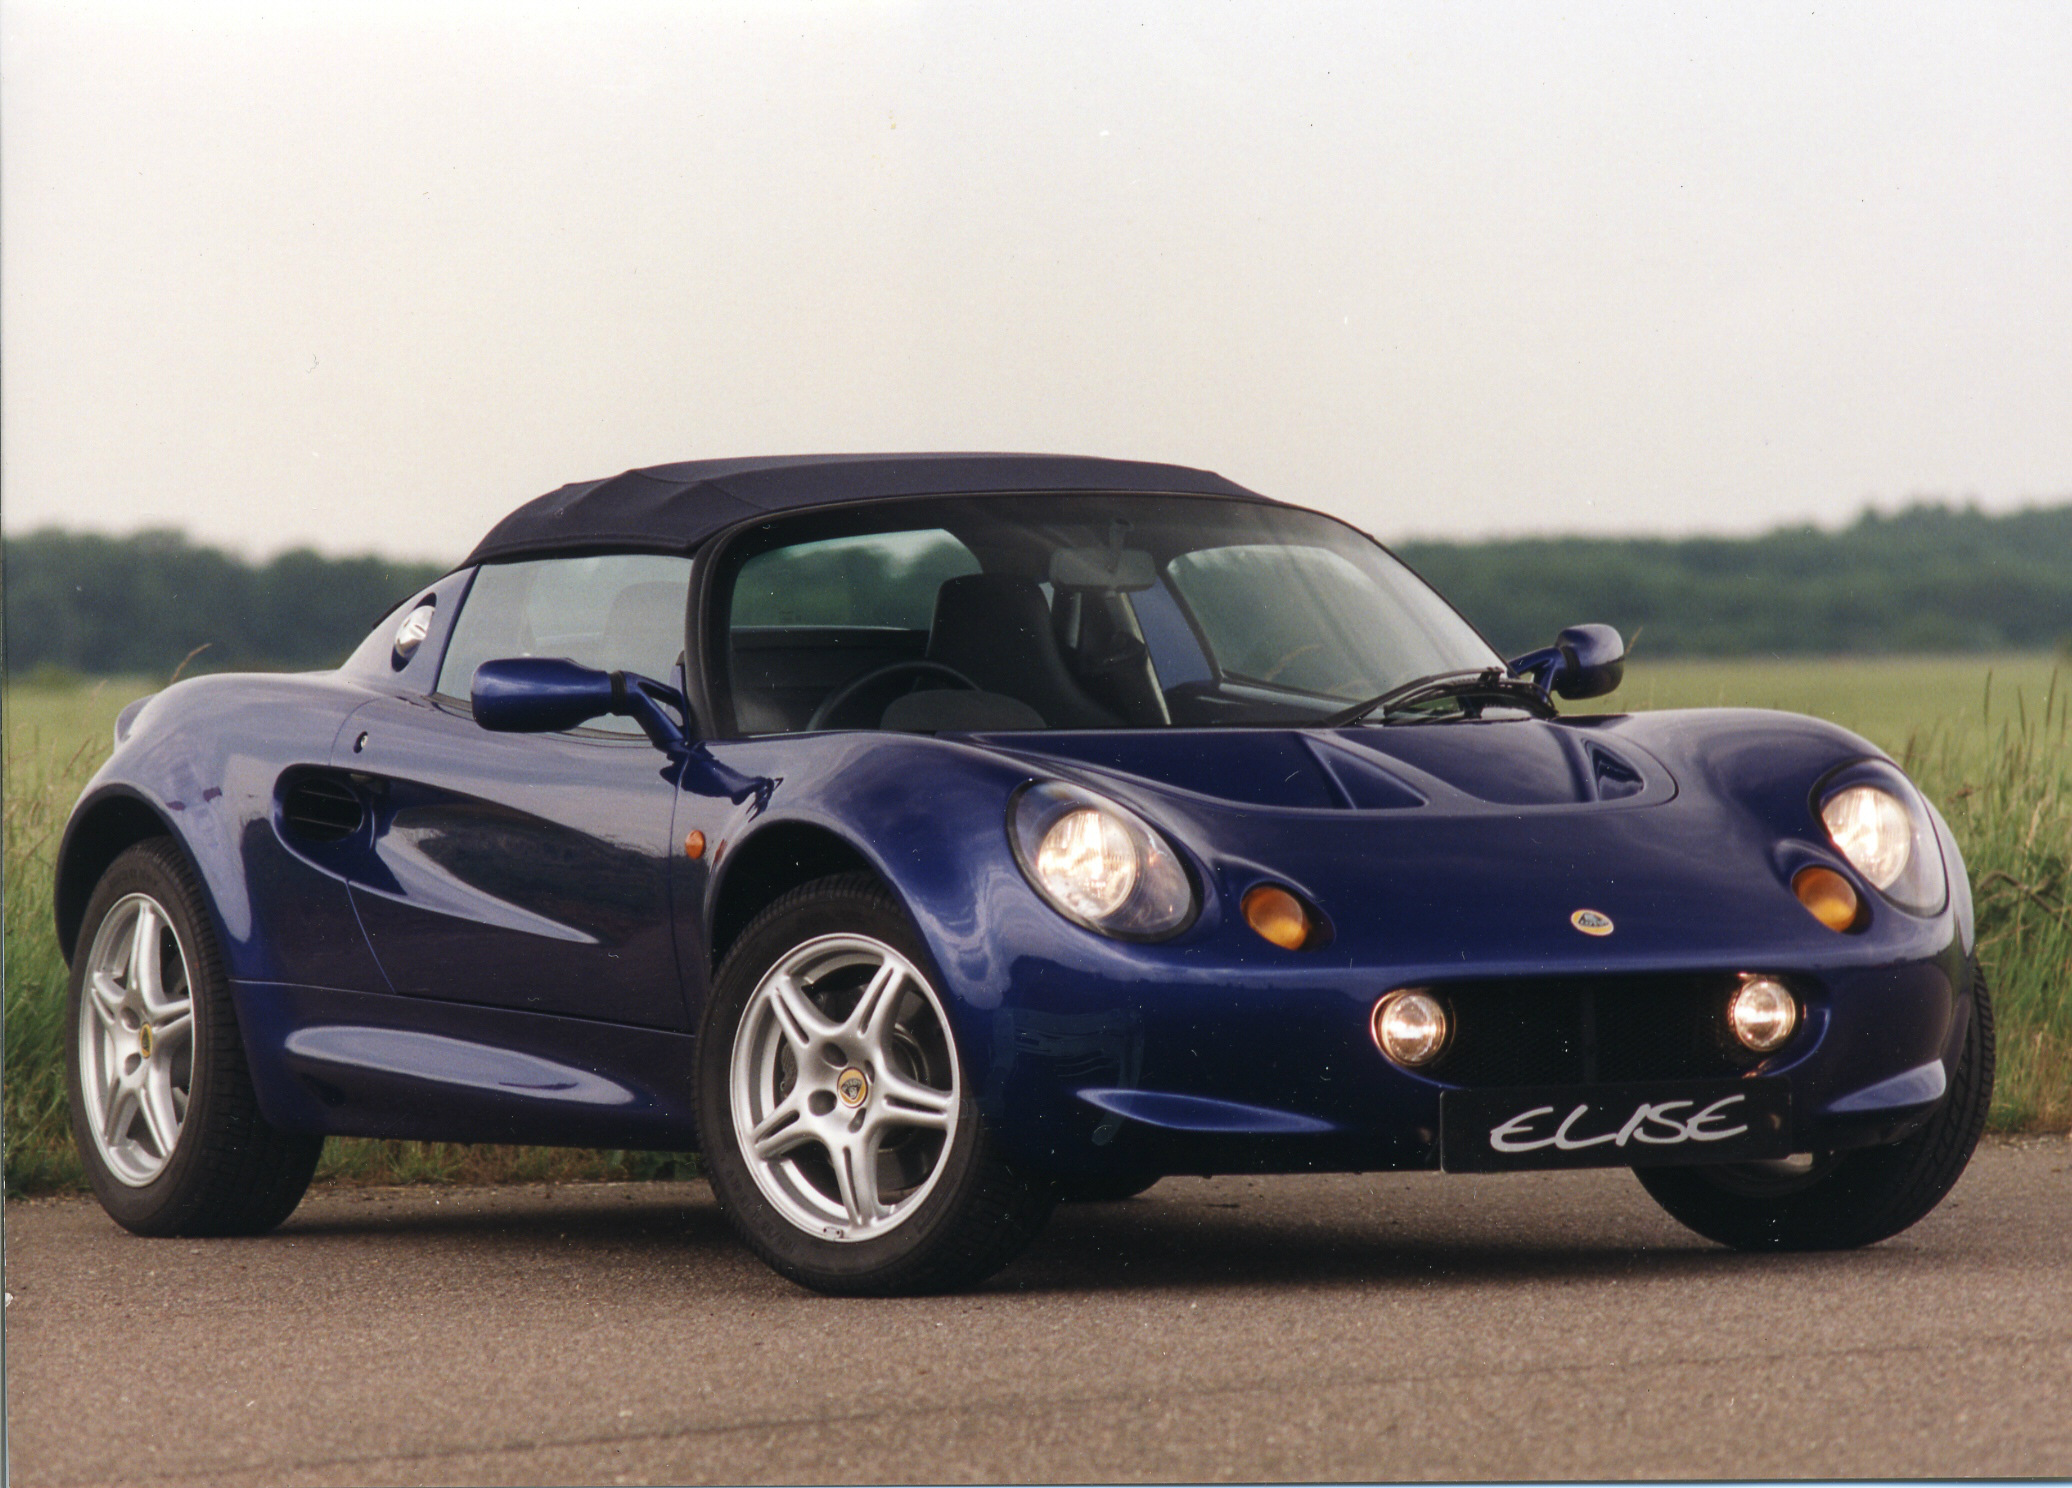 Lotus Elise series 1 is becoming sought after